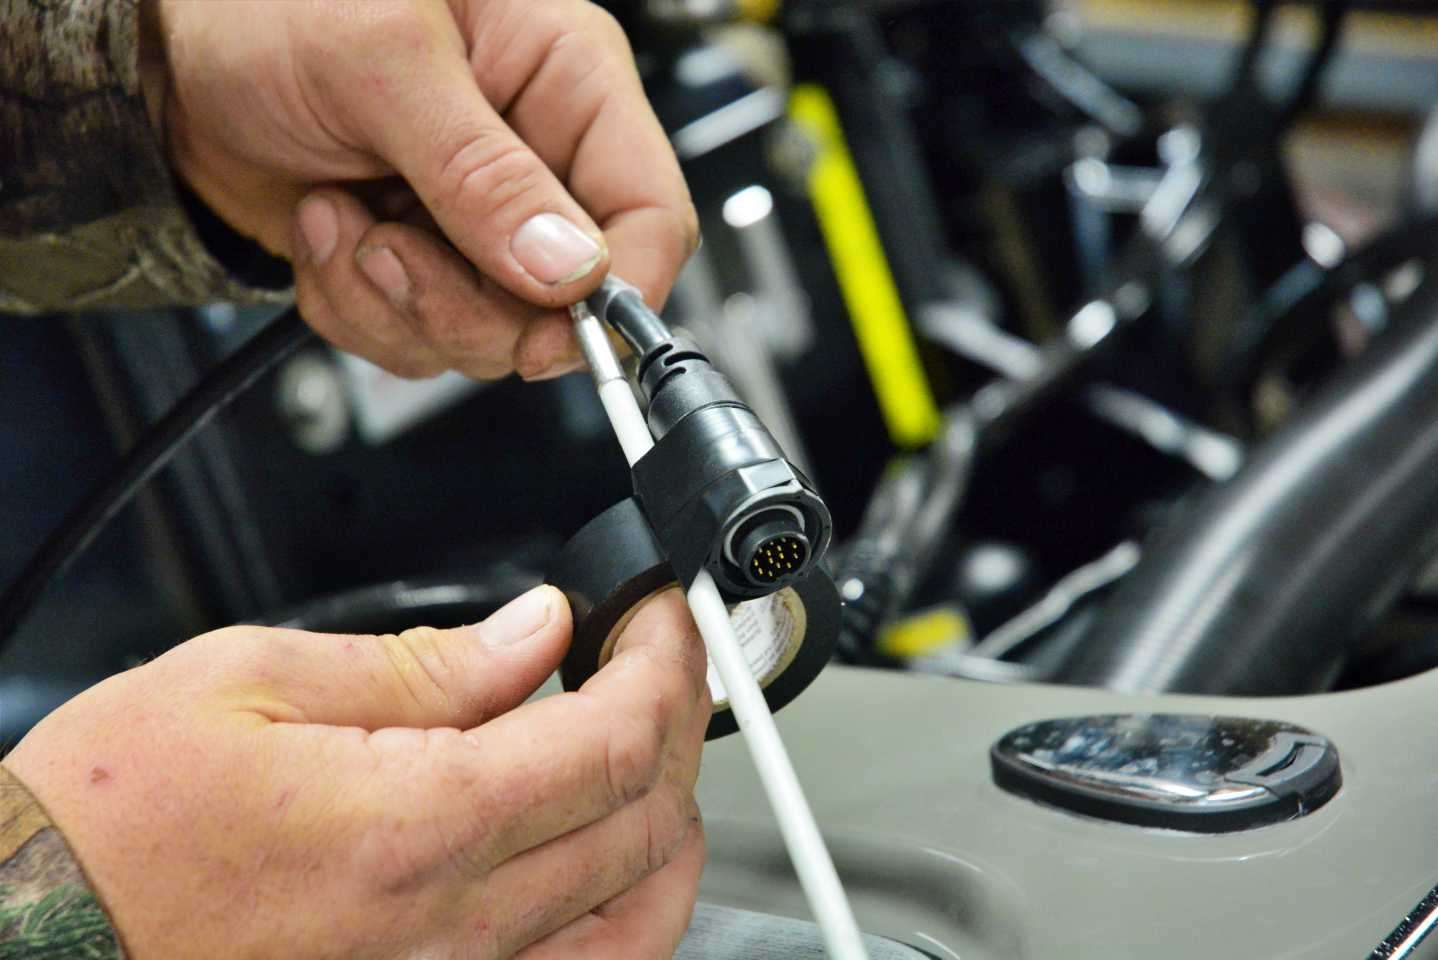 For larger plugs, Palmer prefers making separate runs for the external transducer, internal transducer, and then pulling each harness through the boat. Doing separate pulls like this â instead of all the plugs together â prevents the cables from getting stuck or coming apart during the pull. 
